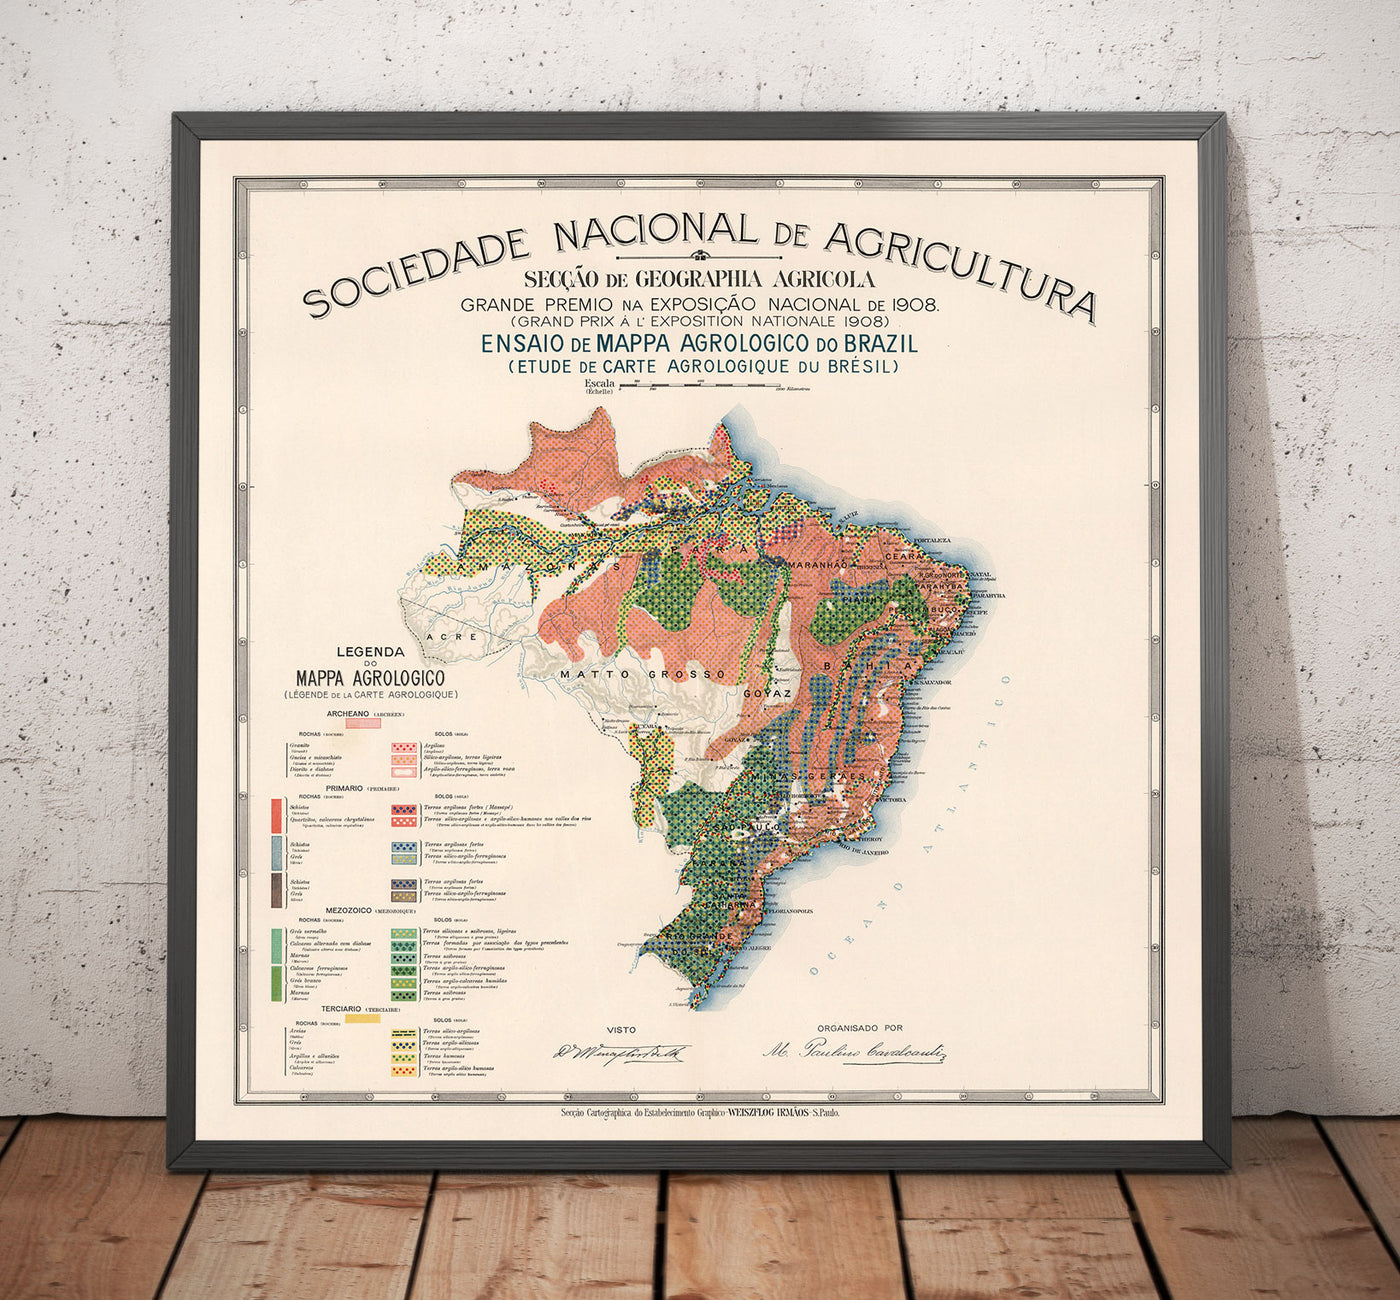 Old Map of Brazil Agrology, 1908 - Agriculture, Geology, Rocks, Soil - Rio, Porto Alegre, Amazon